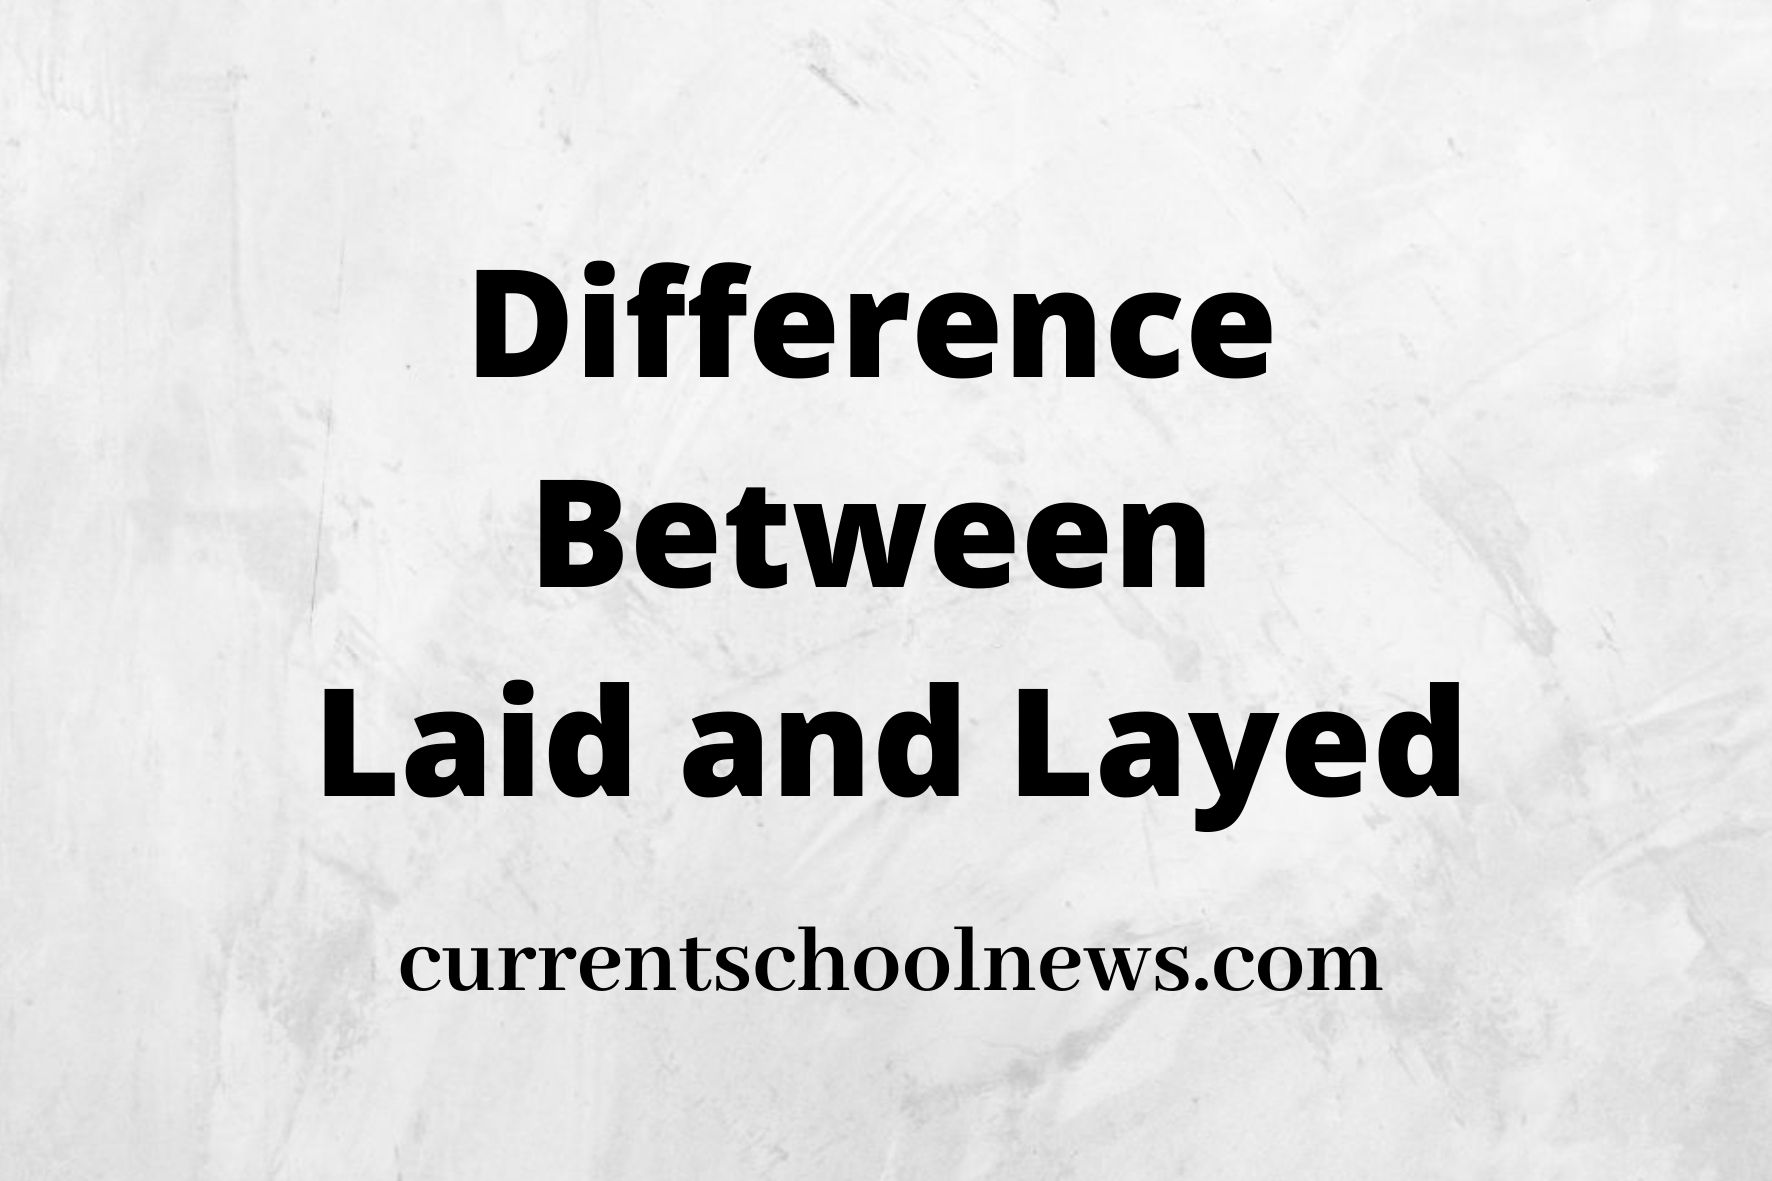 10 Notable Differences Between Laid and Layed